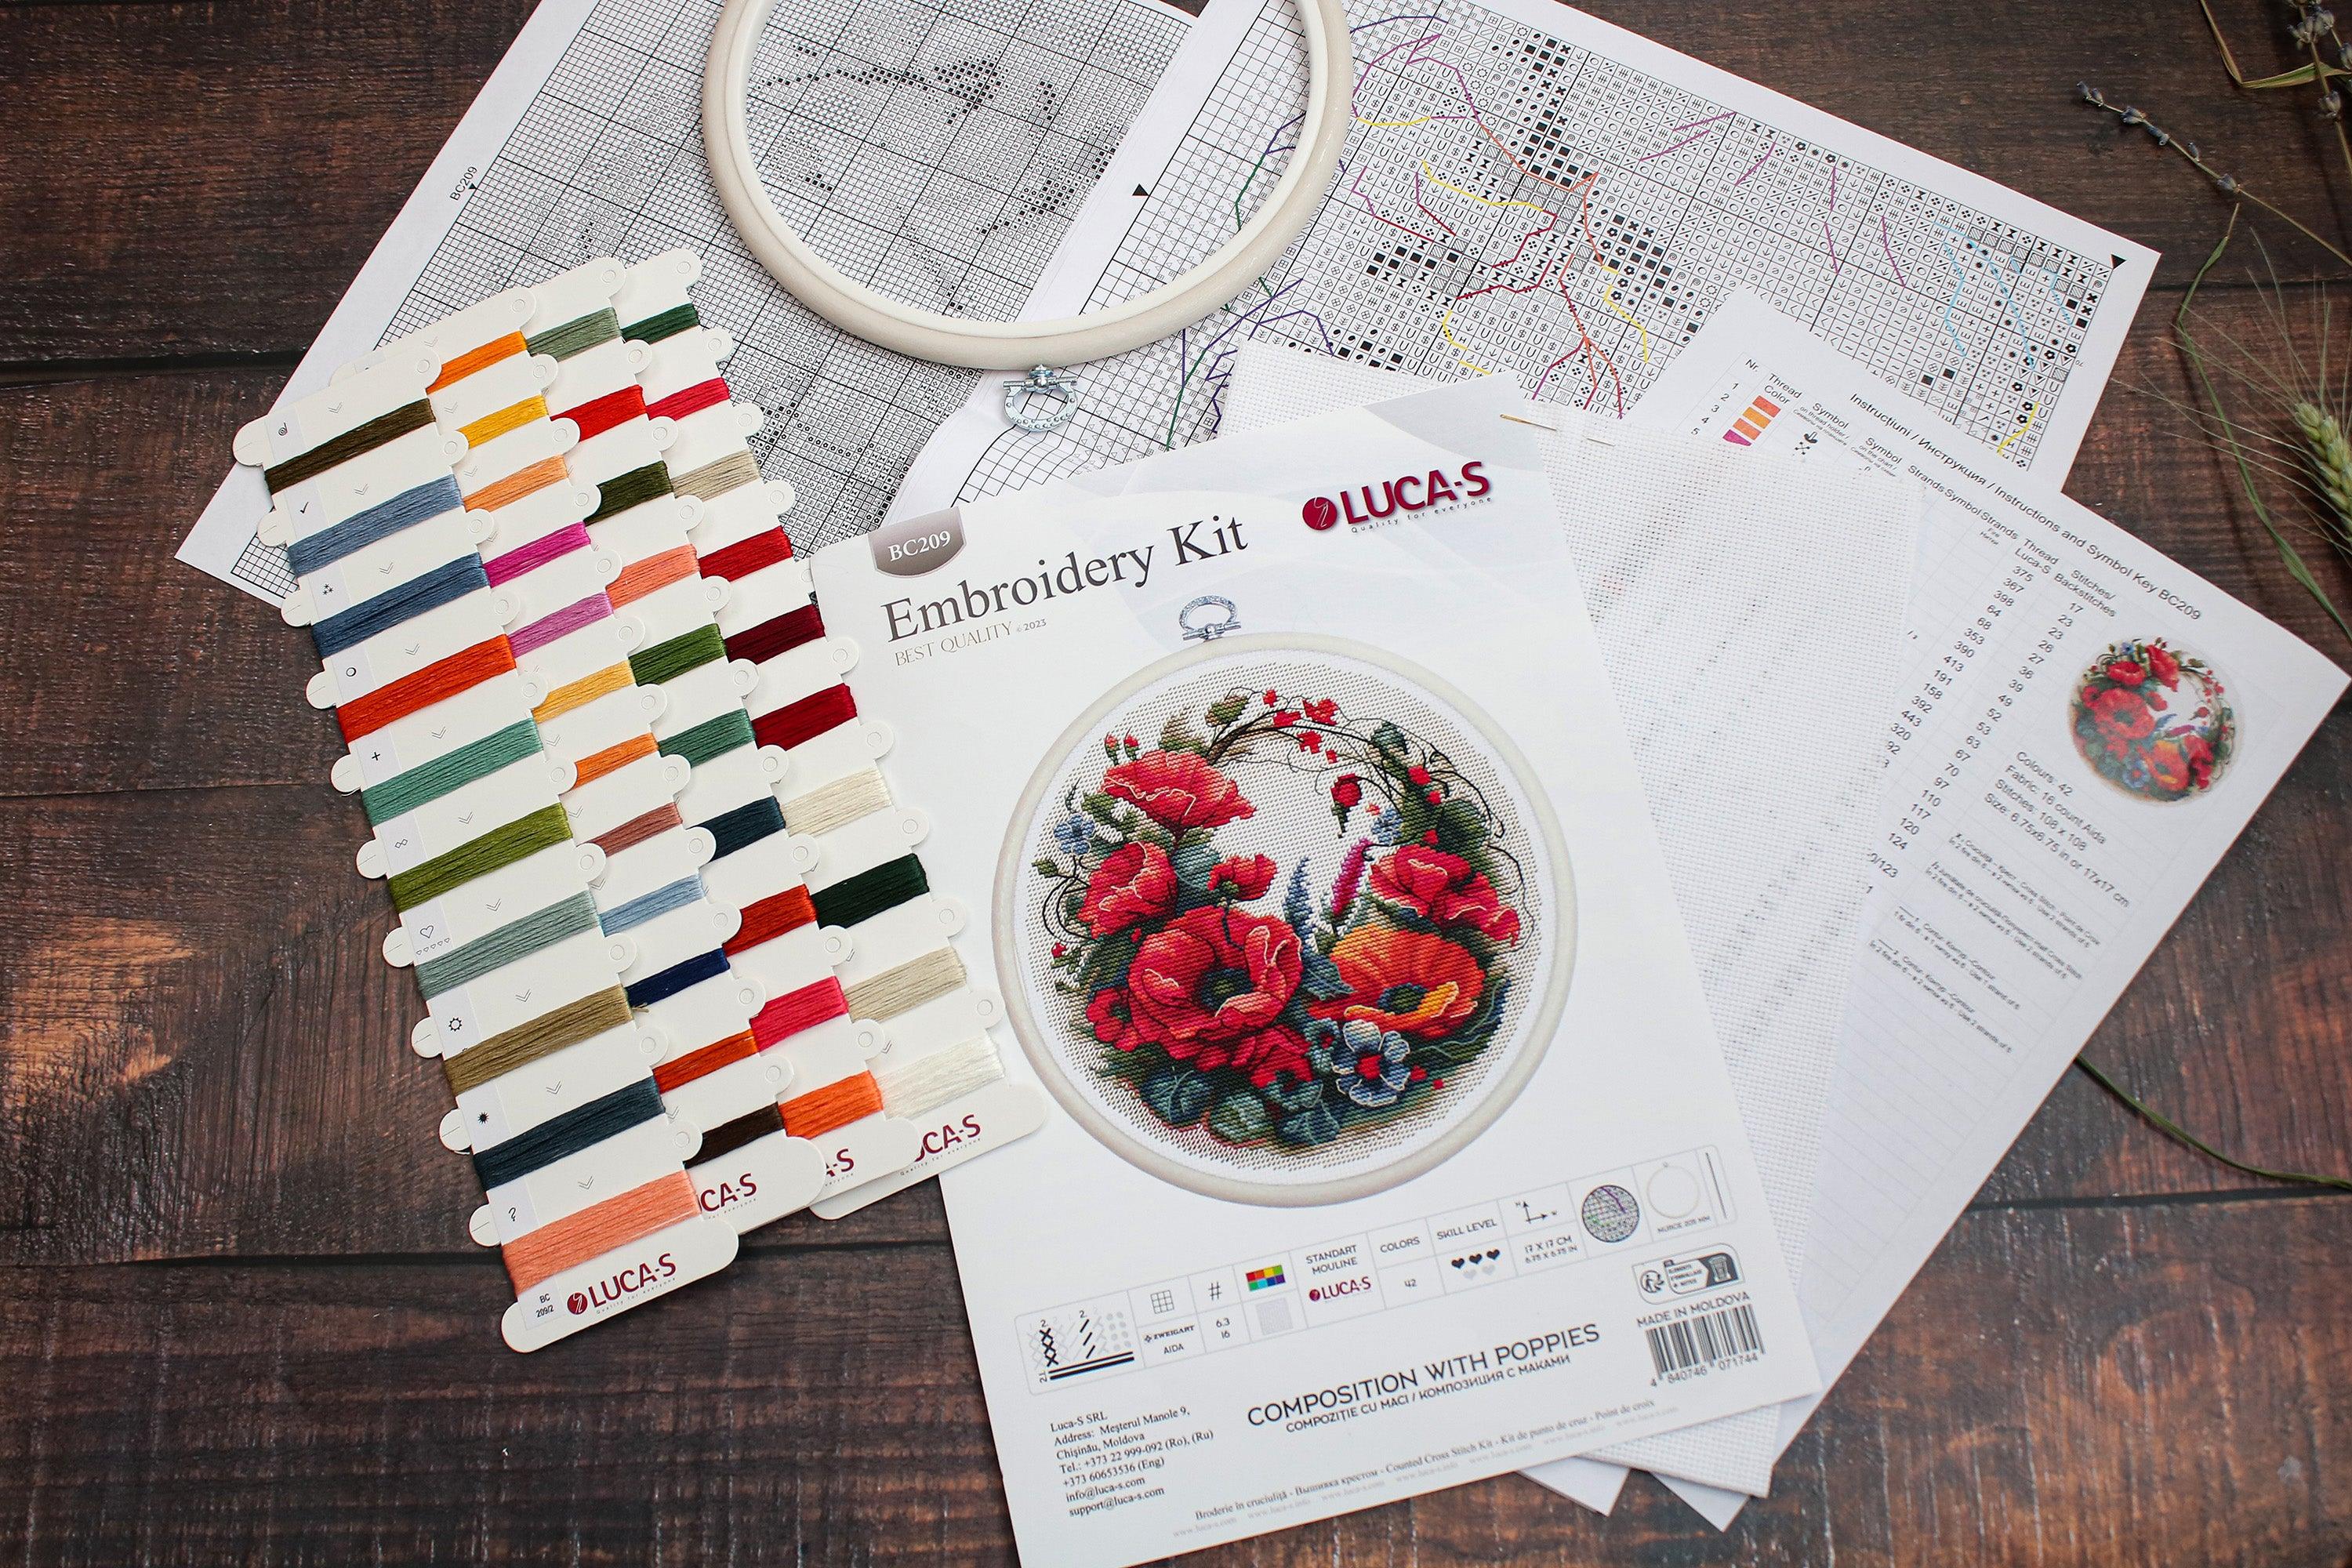 Cross Stitch Kit with Hoop Included Luca-S - Composition With Poppies, BC209 - Luca-S Cross Stitch Kits